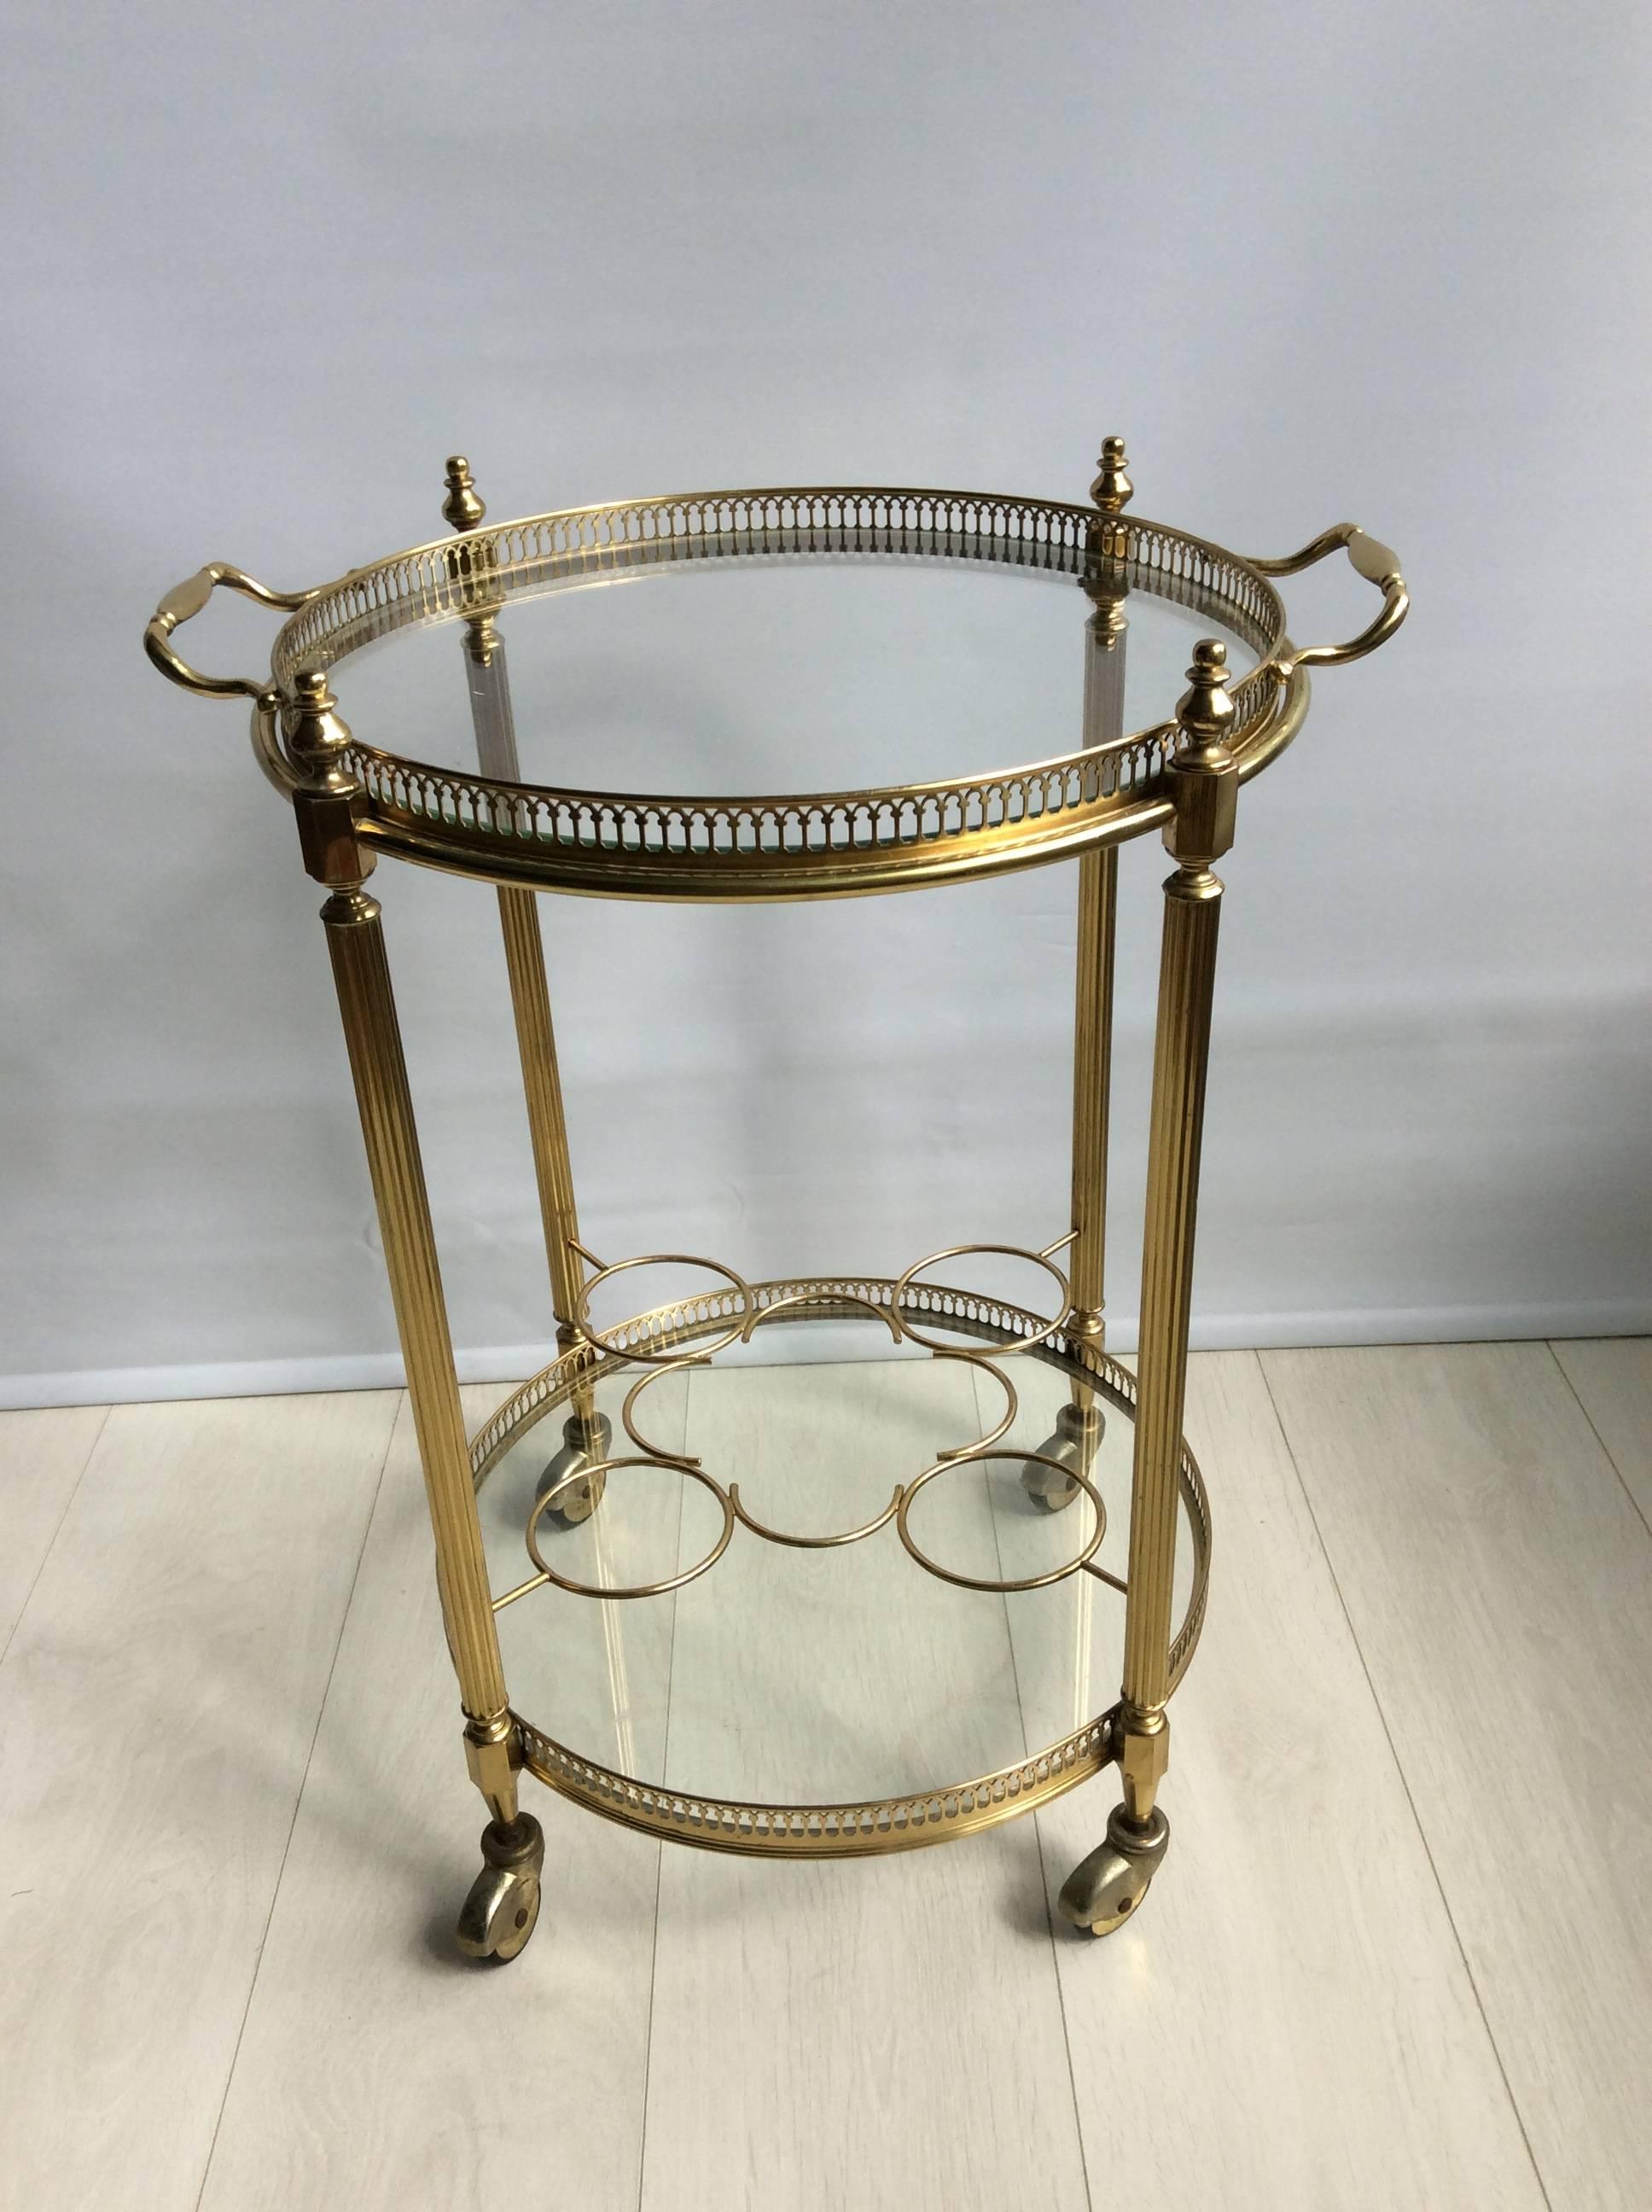 20th Century Round Vintage French Drinks Trolley or Bar Cart